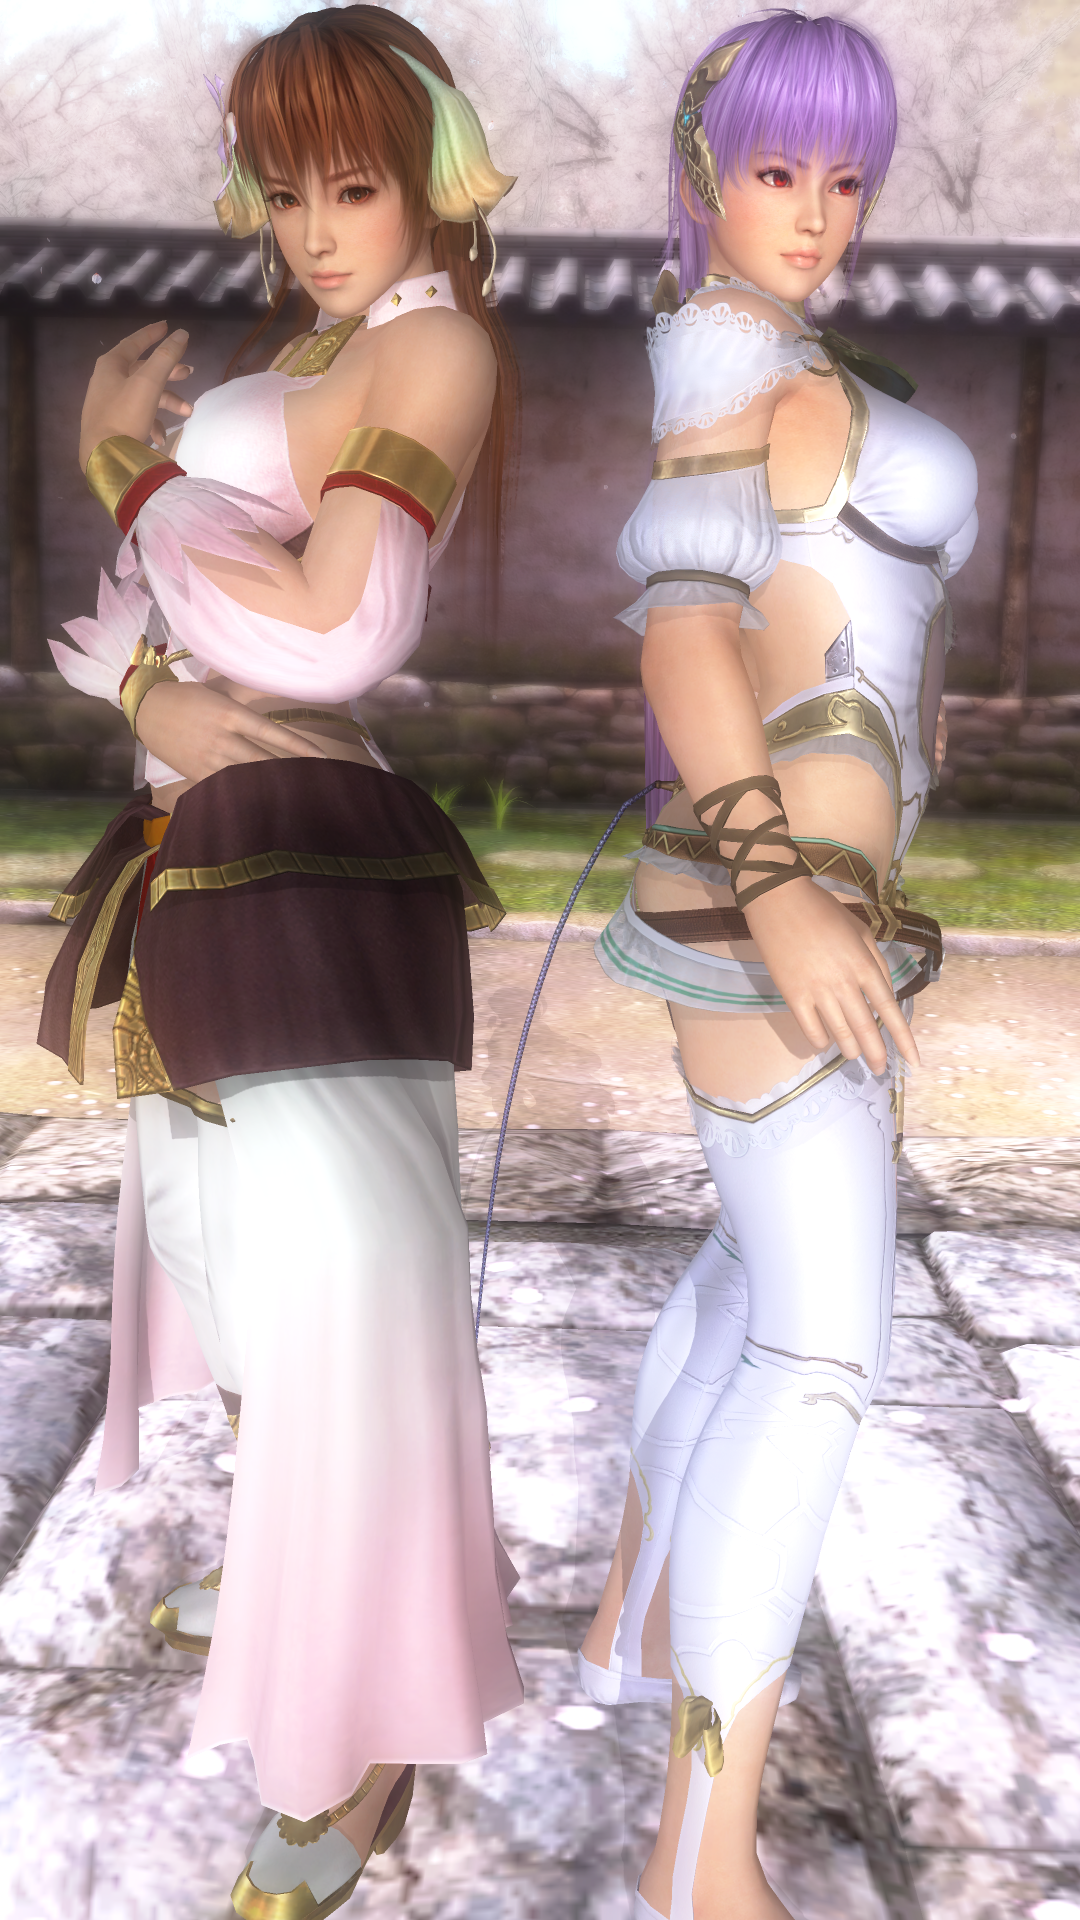 kasumi_and_ayane___ion_and_plachta__18__by_asamiya_kof-da3q0s6.png